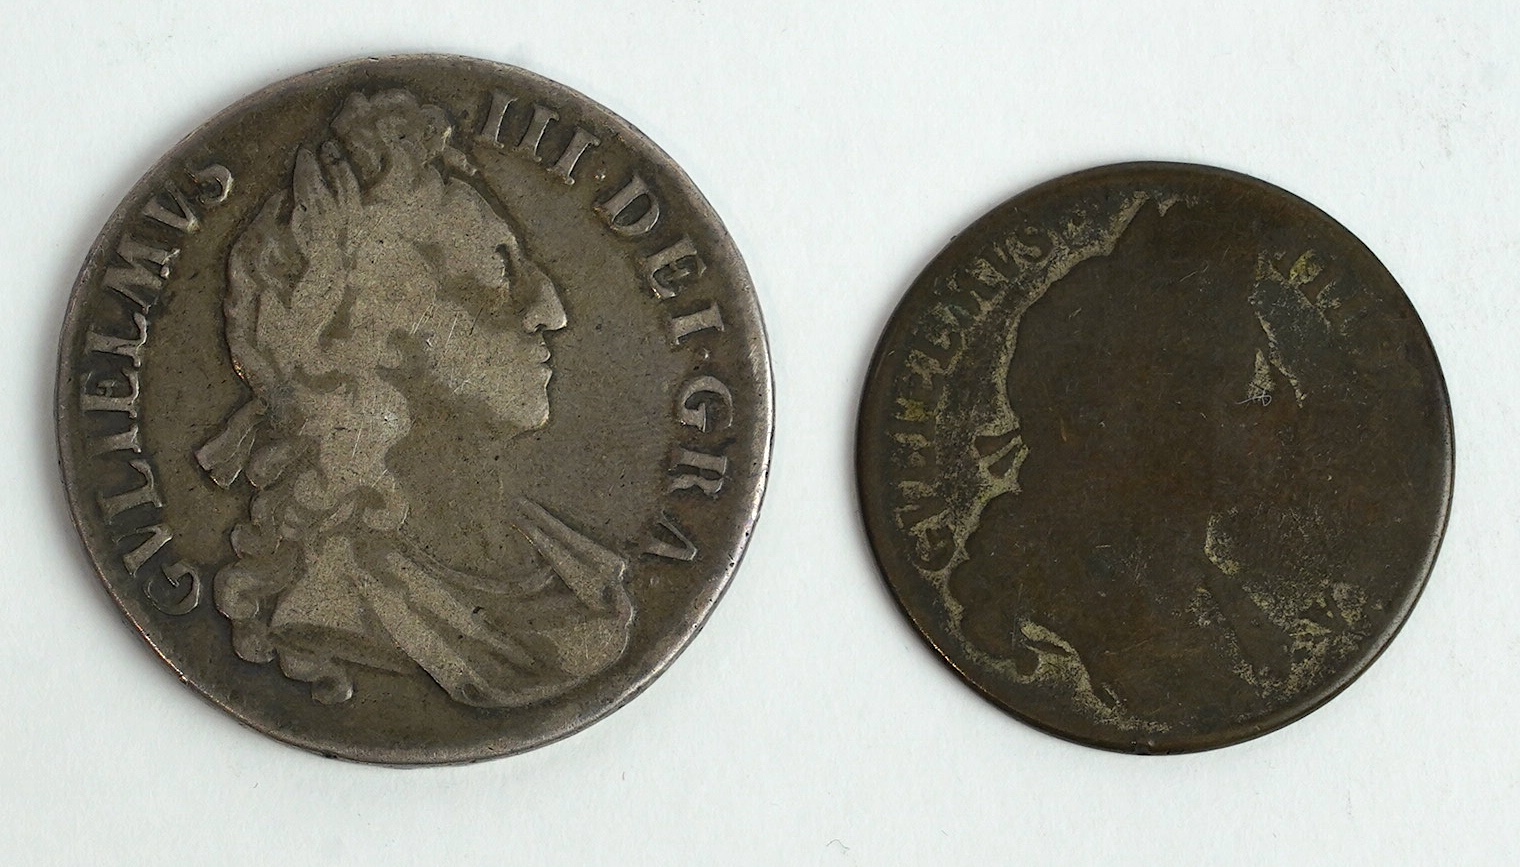 British coins, William III (1694-1702), silver crown ,1695, (S3470), near fine and a contemporary plated copper counterfeit of a halfcrown